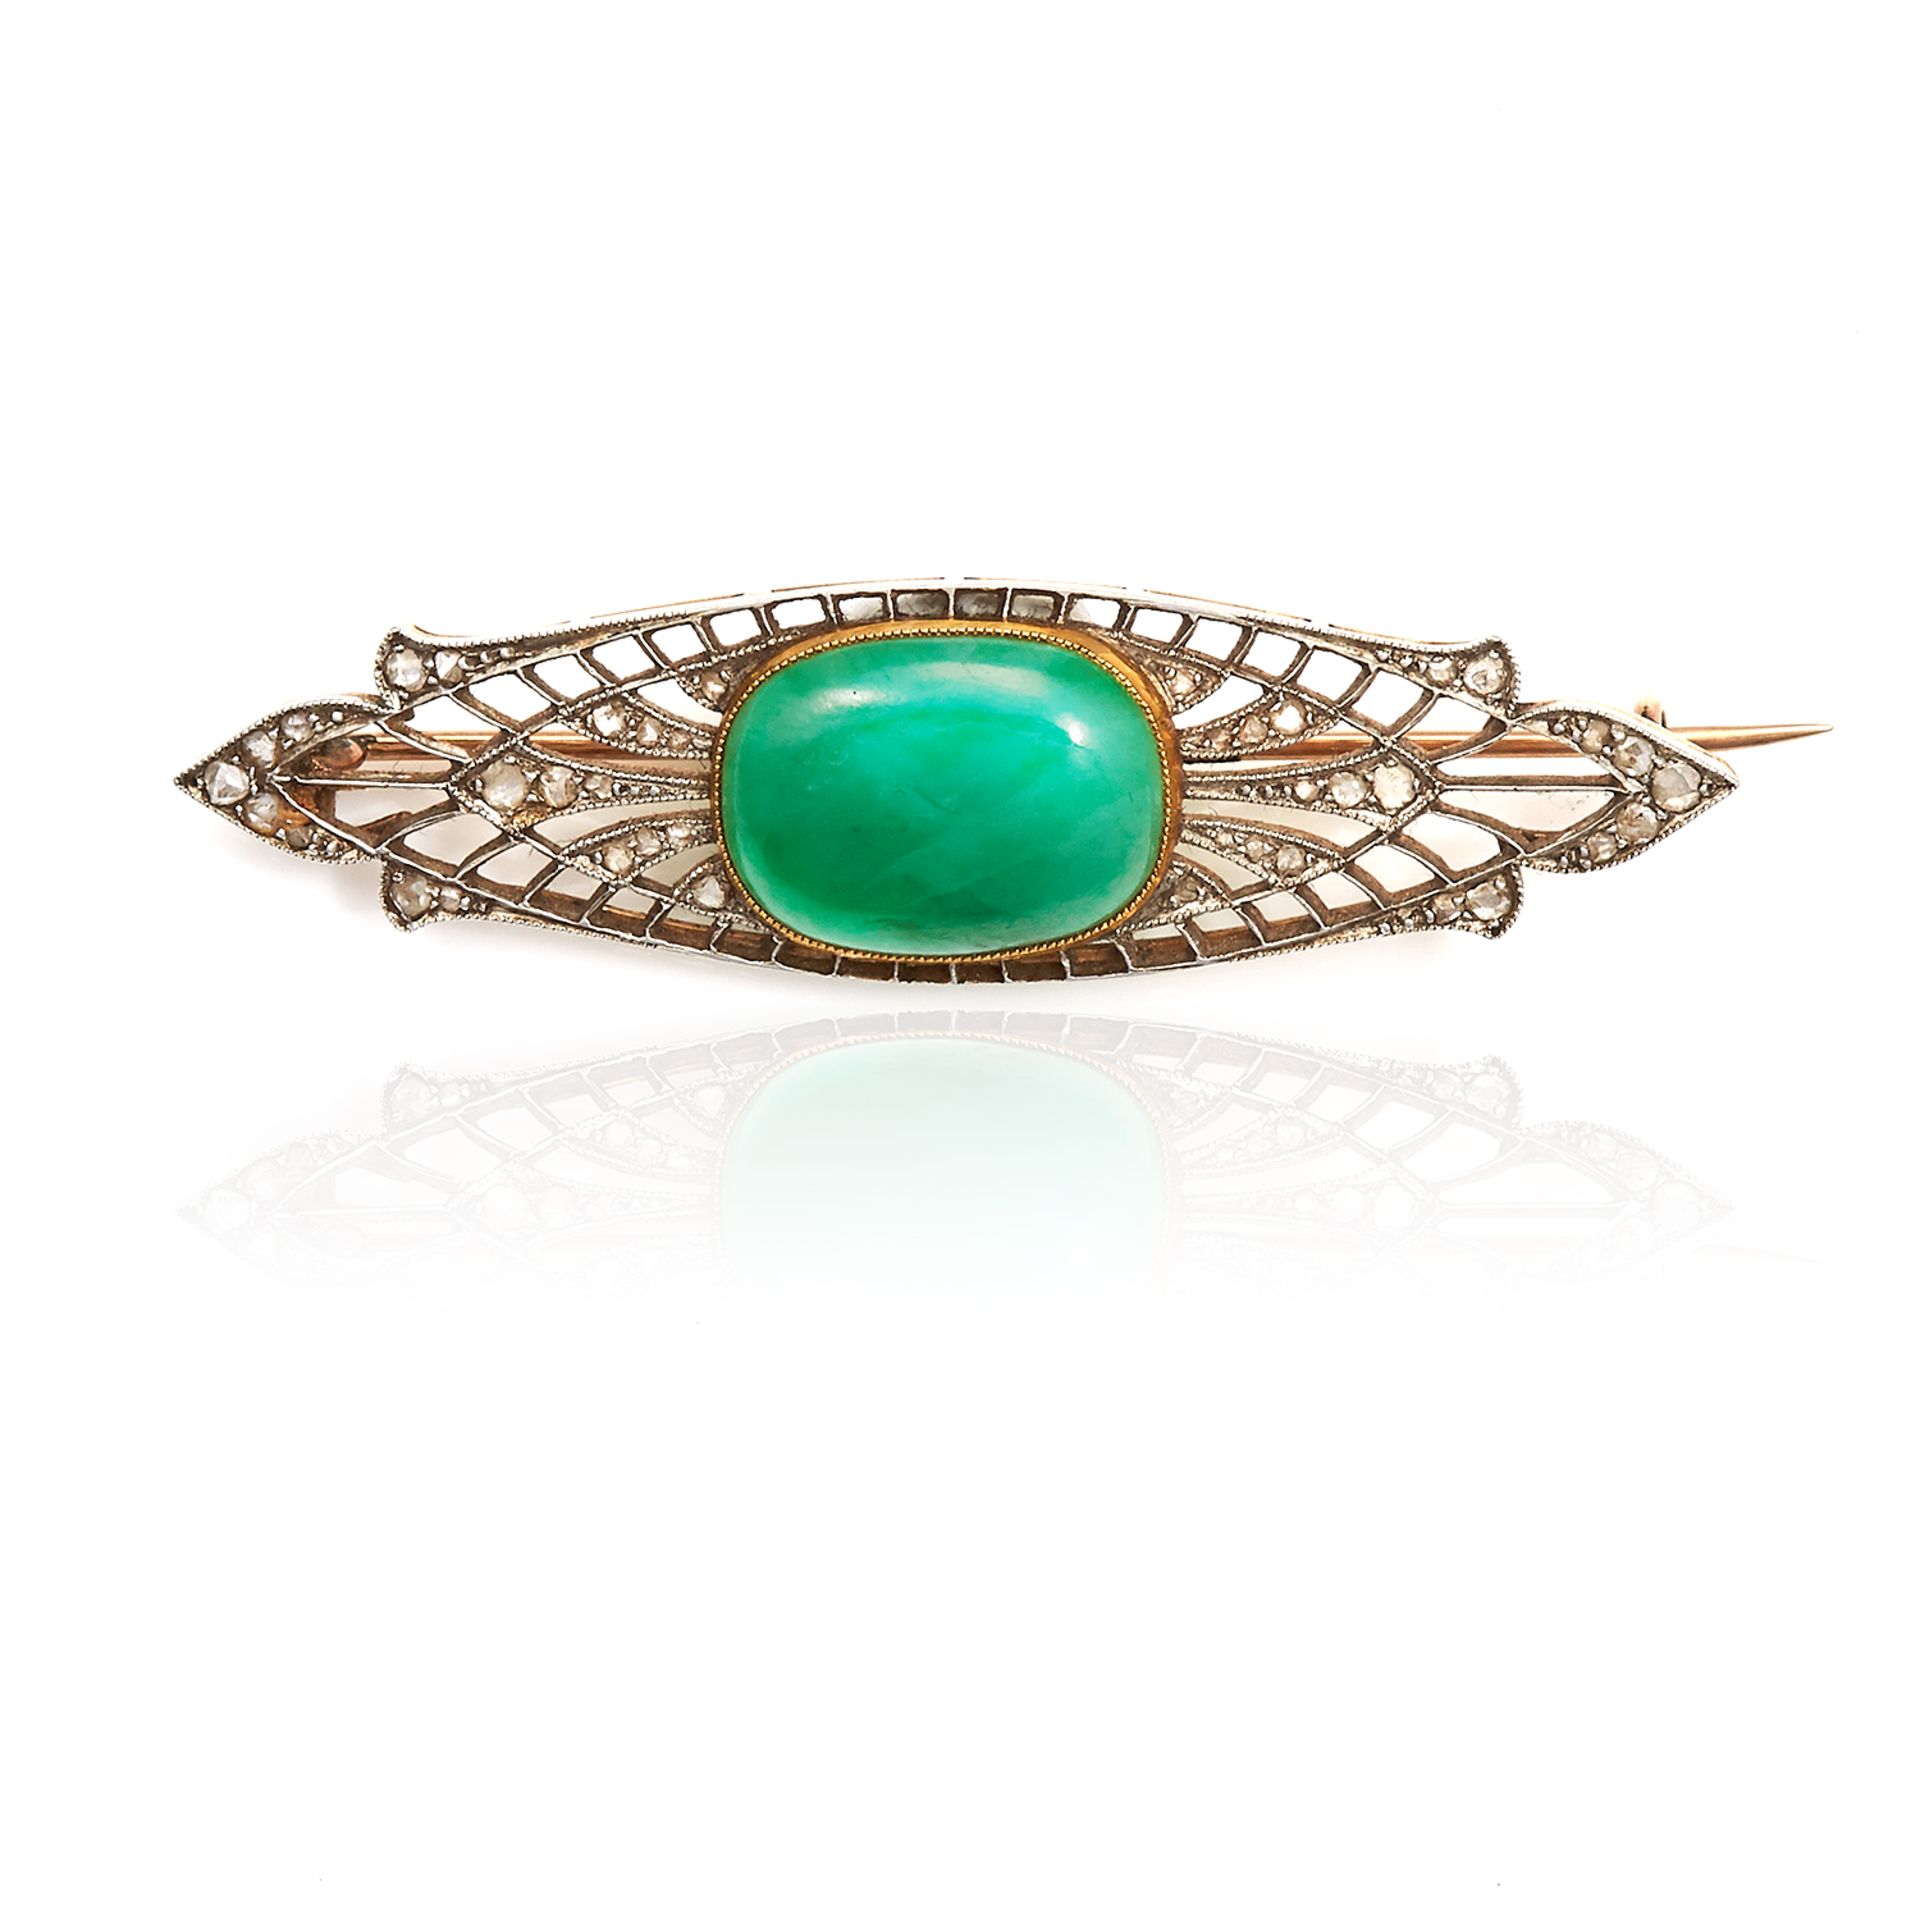 AN ANTIQUE JADEITE JADE AND DIAMOND BROOCH in yellow gold and platinum, set with a central oval